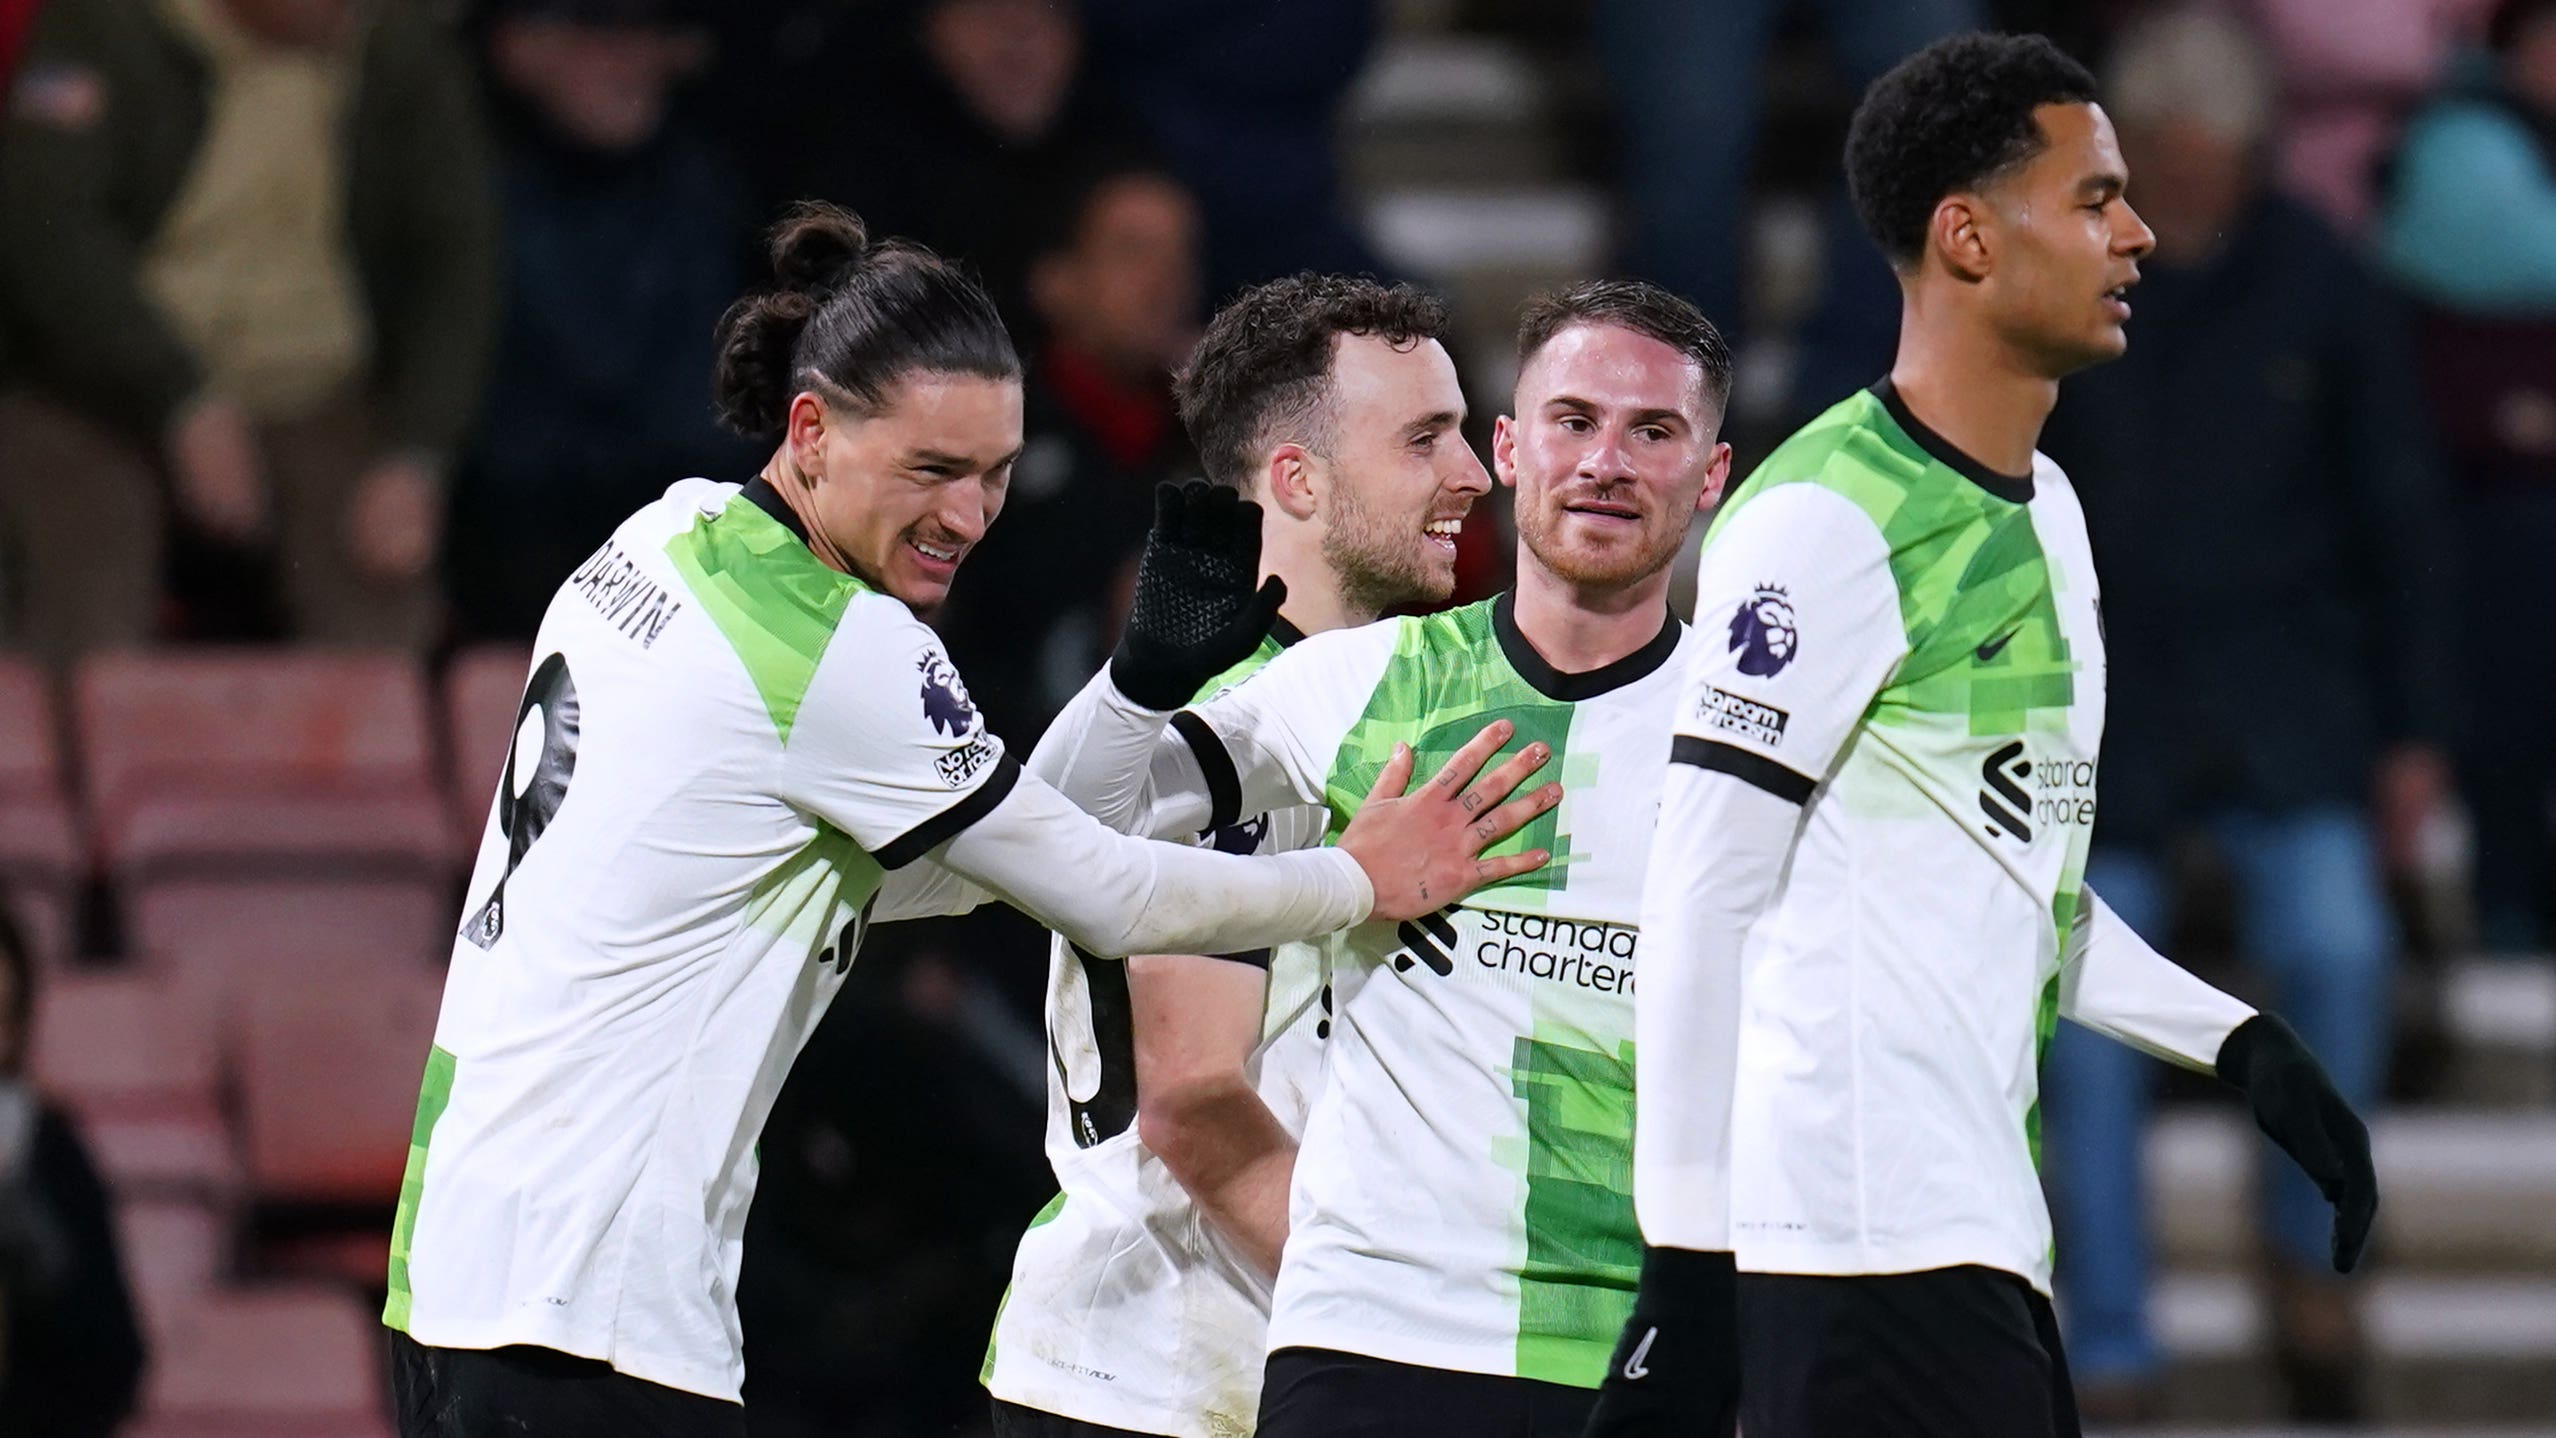 Darwin Nunez and Diogo Jota doubles send Liverpool five points clear at the top